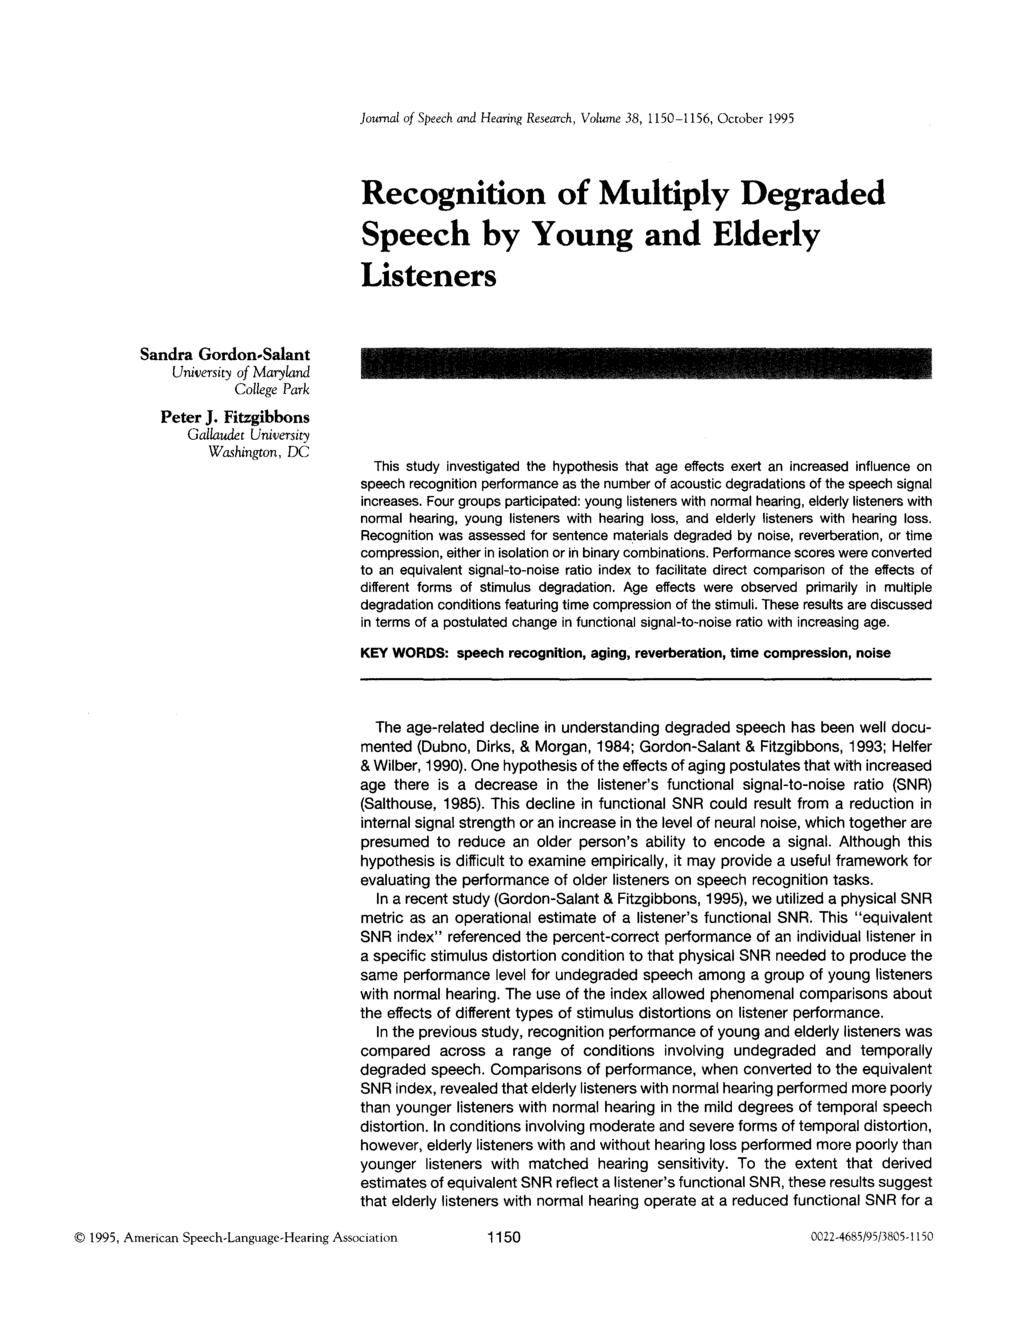 Journal of Speech and Hearing Research, Volume 38, 1150-1156, October 1995 Recognition of Multiply Degraded Speech by Young and Elderly Listeners Sandra Gordon-Salant University of Maryland College